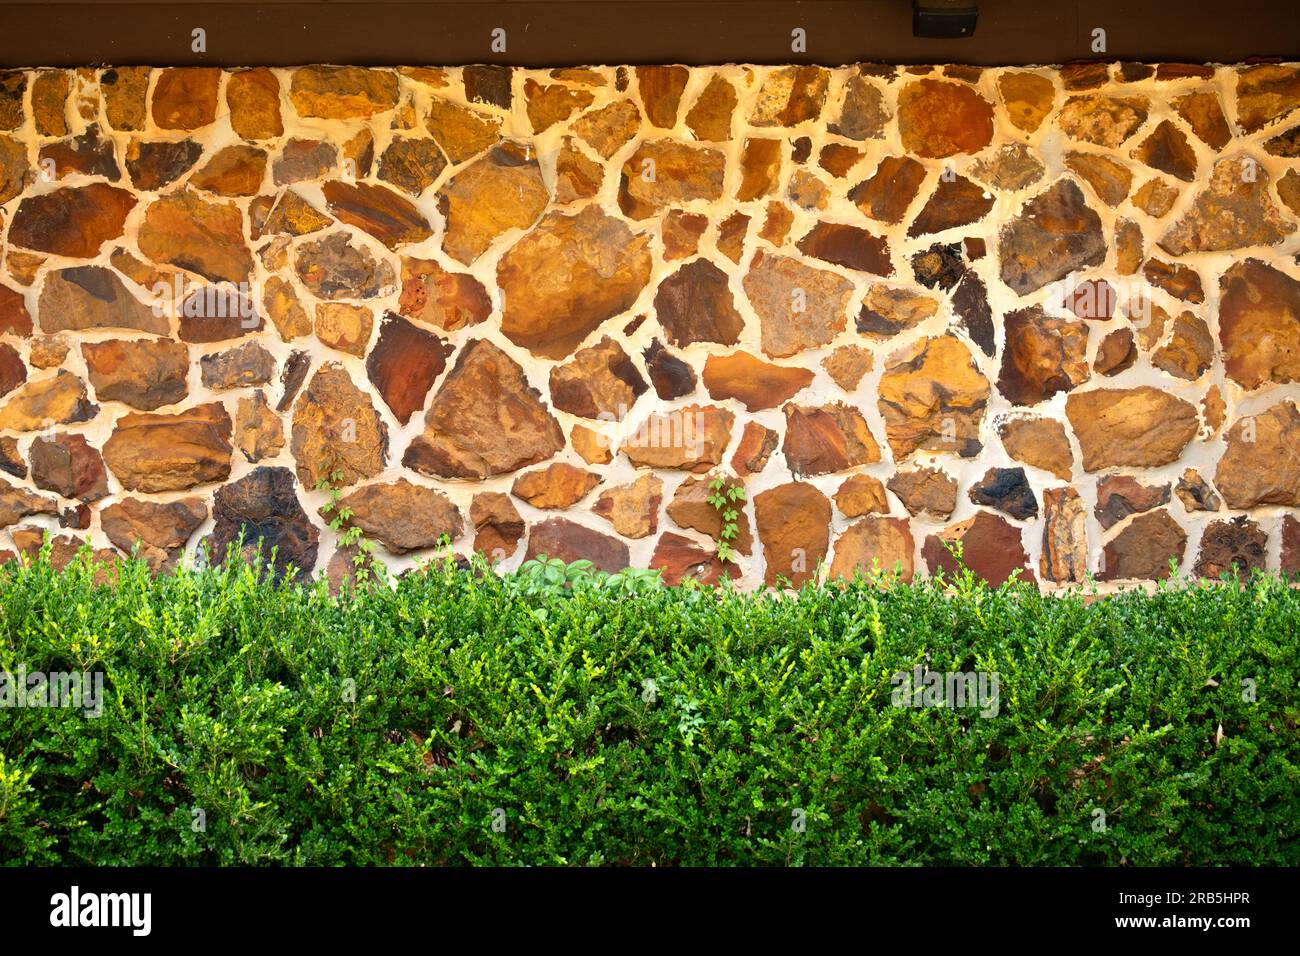 Box wood hedge in front of stone wall background Stock Photo